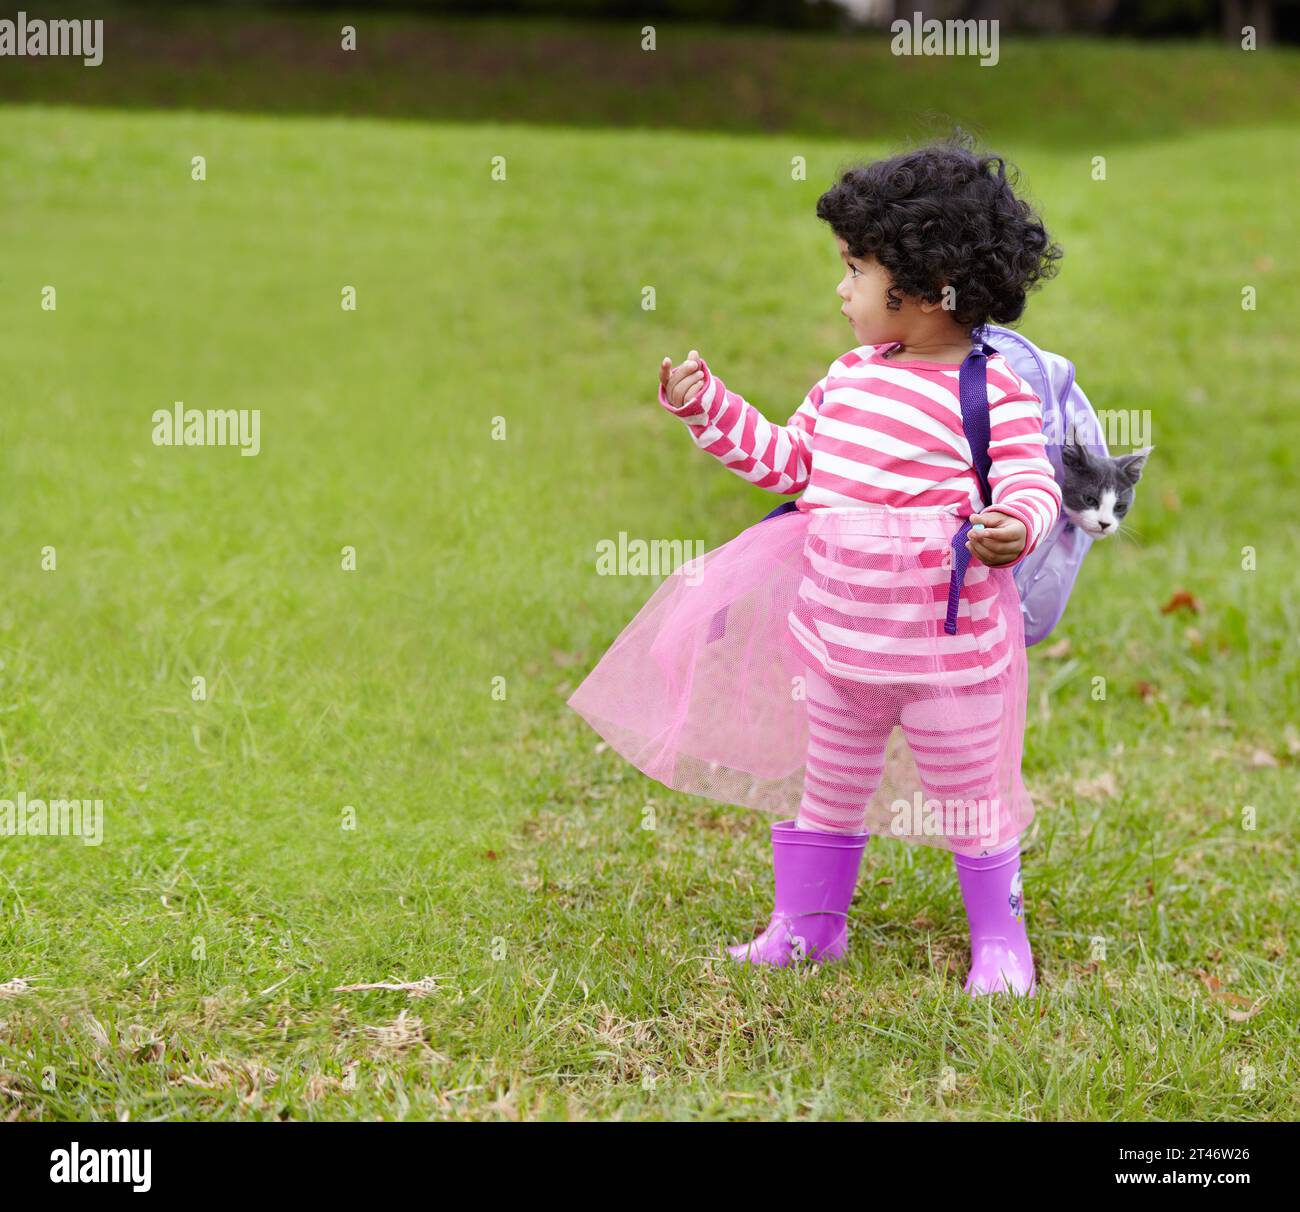 Nature, kitten and girl child with backpack walking on grass in outdoor garden in summer. Confused, backyard and young kid with childhood playing on Stock Photo